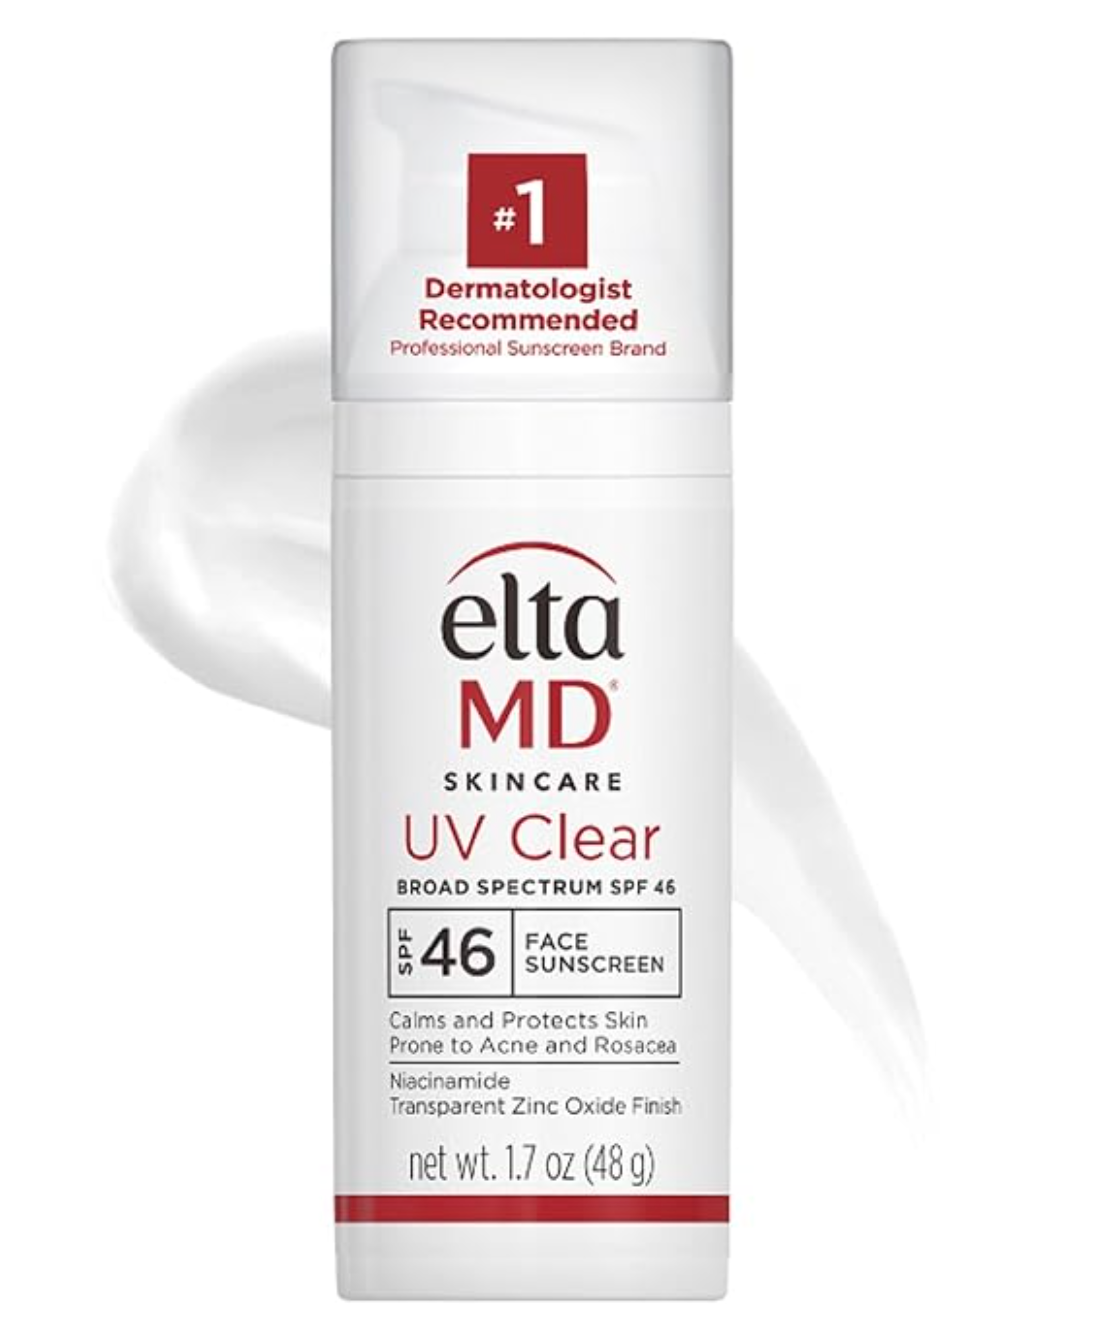 a bottle of elta md skincare uv clear face sunscreen .